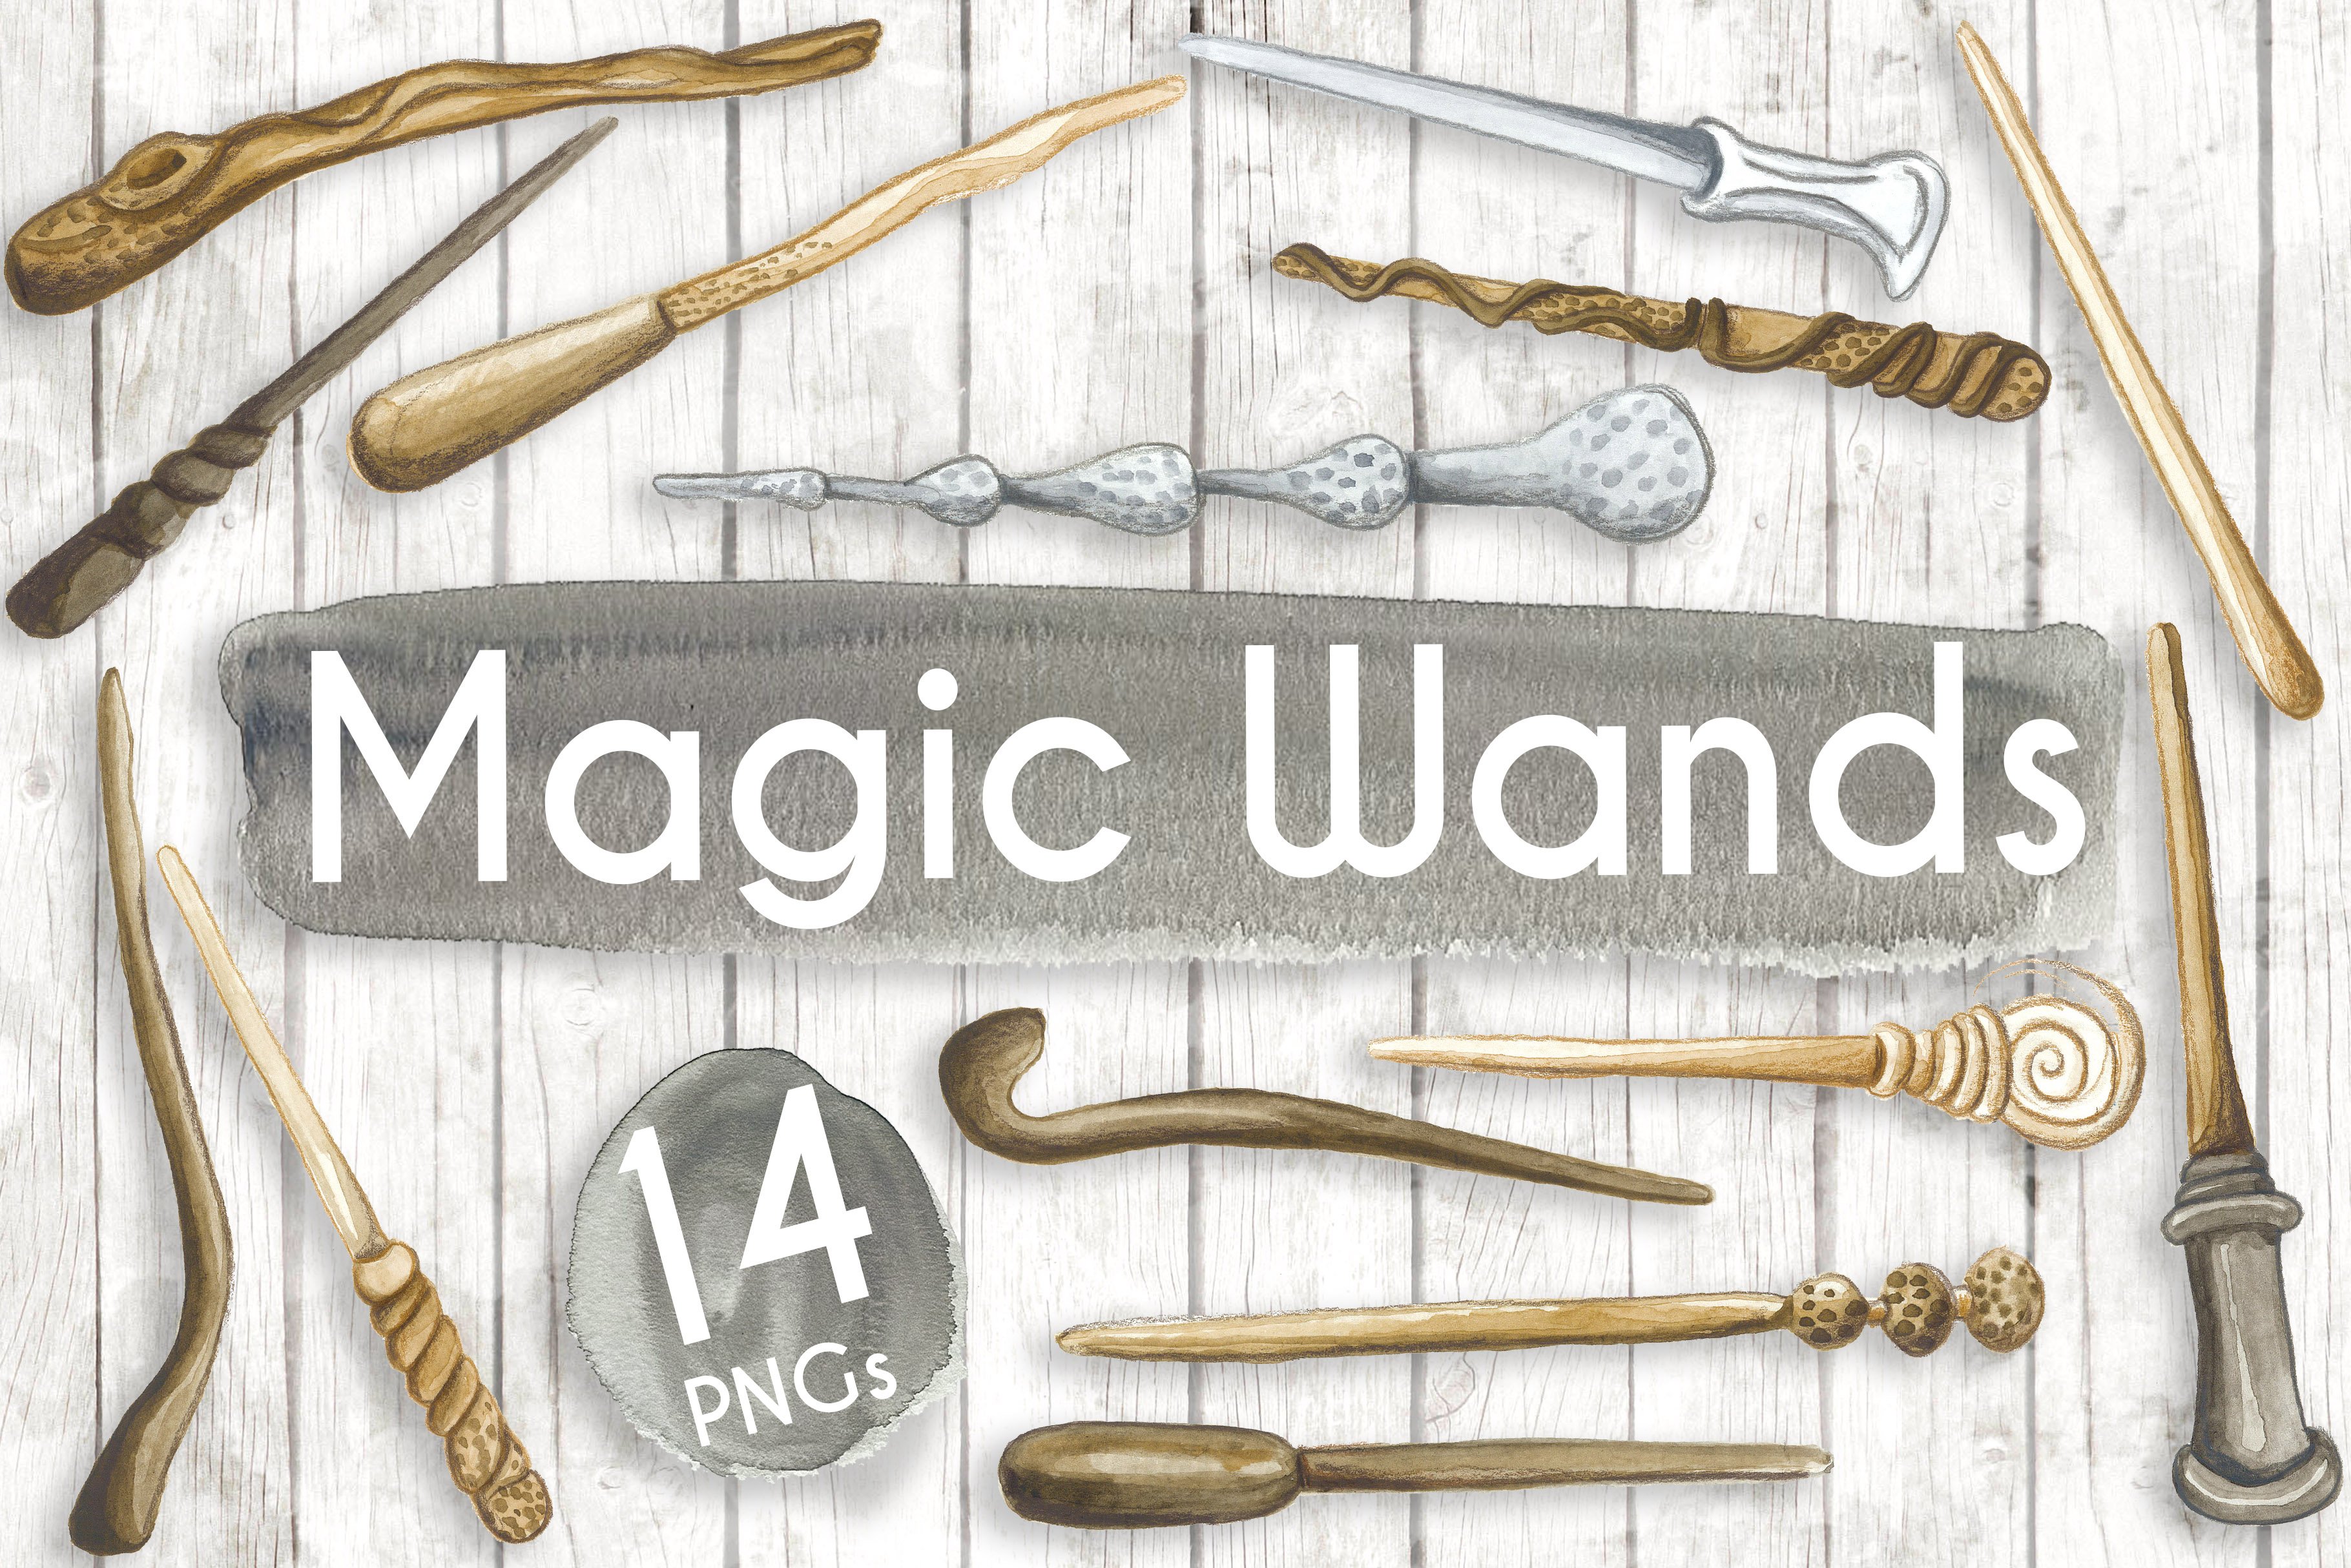 Watercolour Wooden Magic Wands cover image.